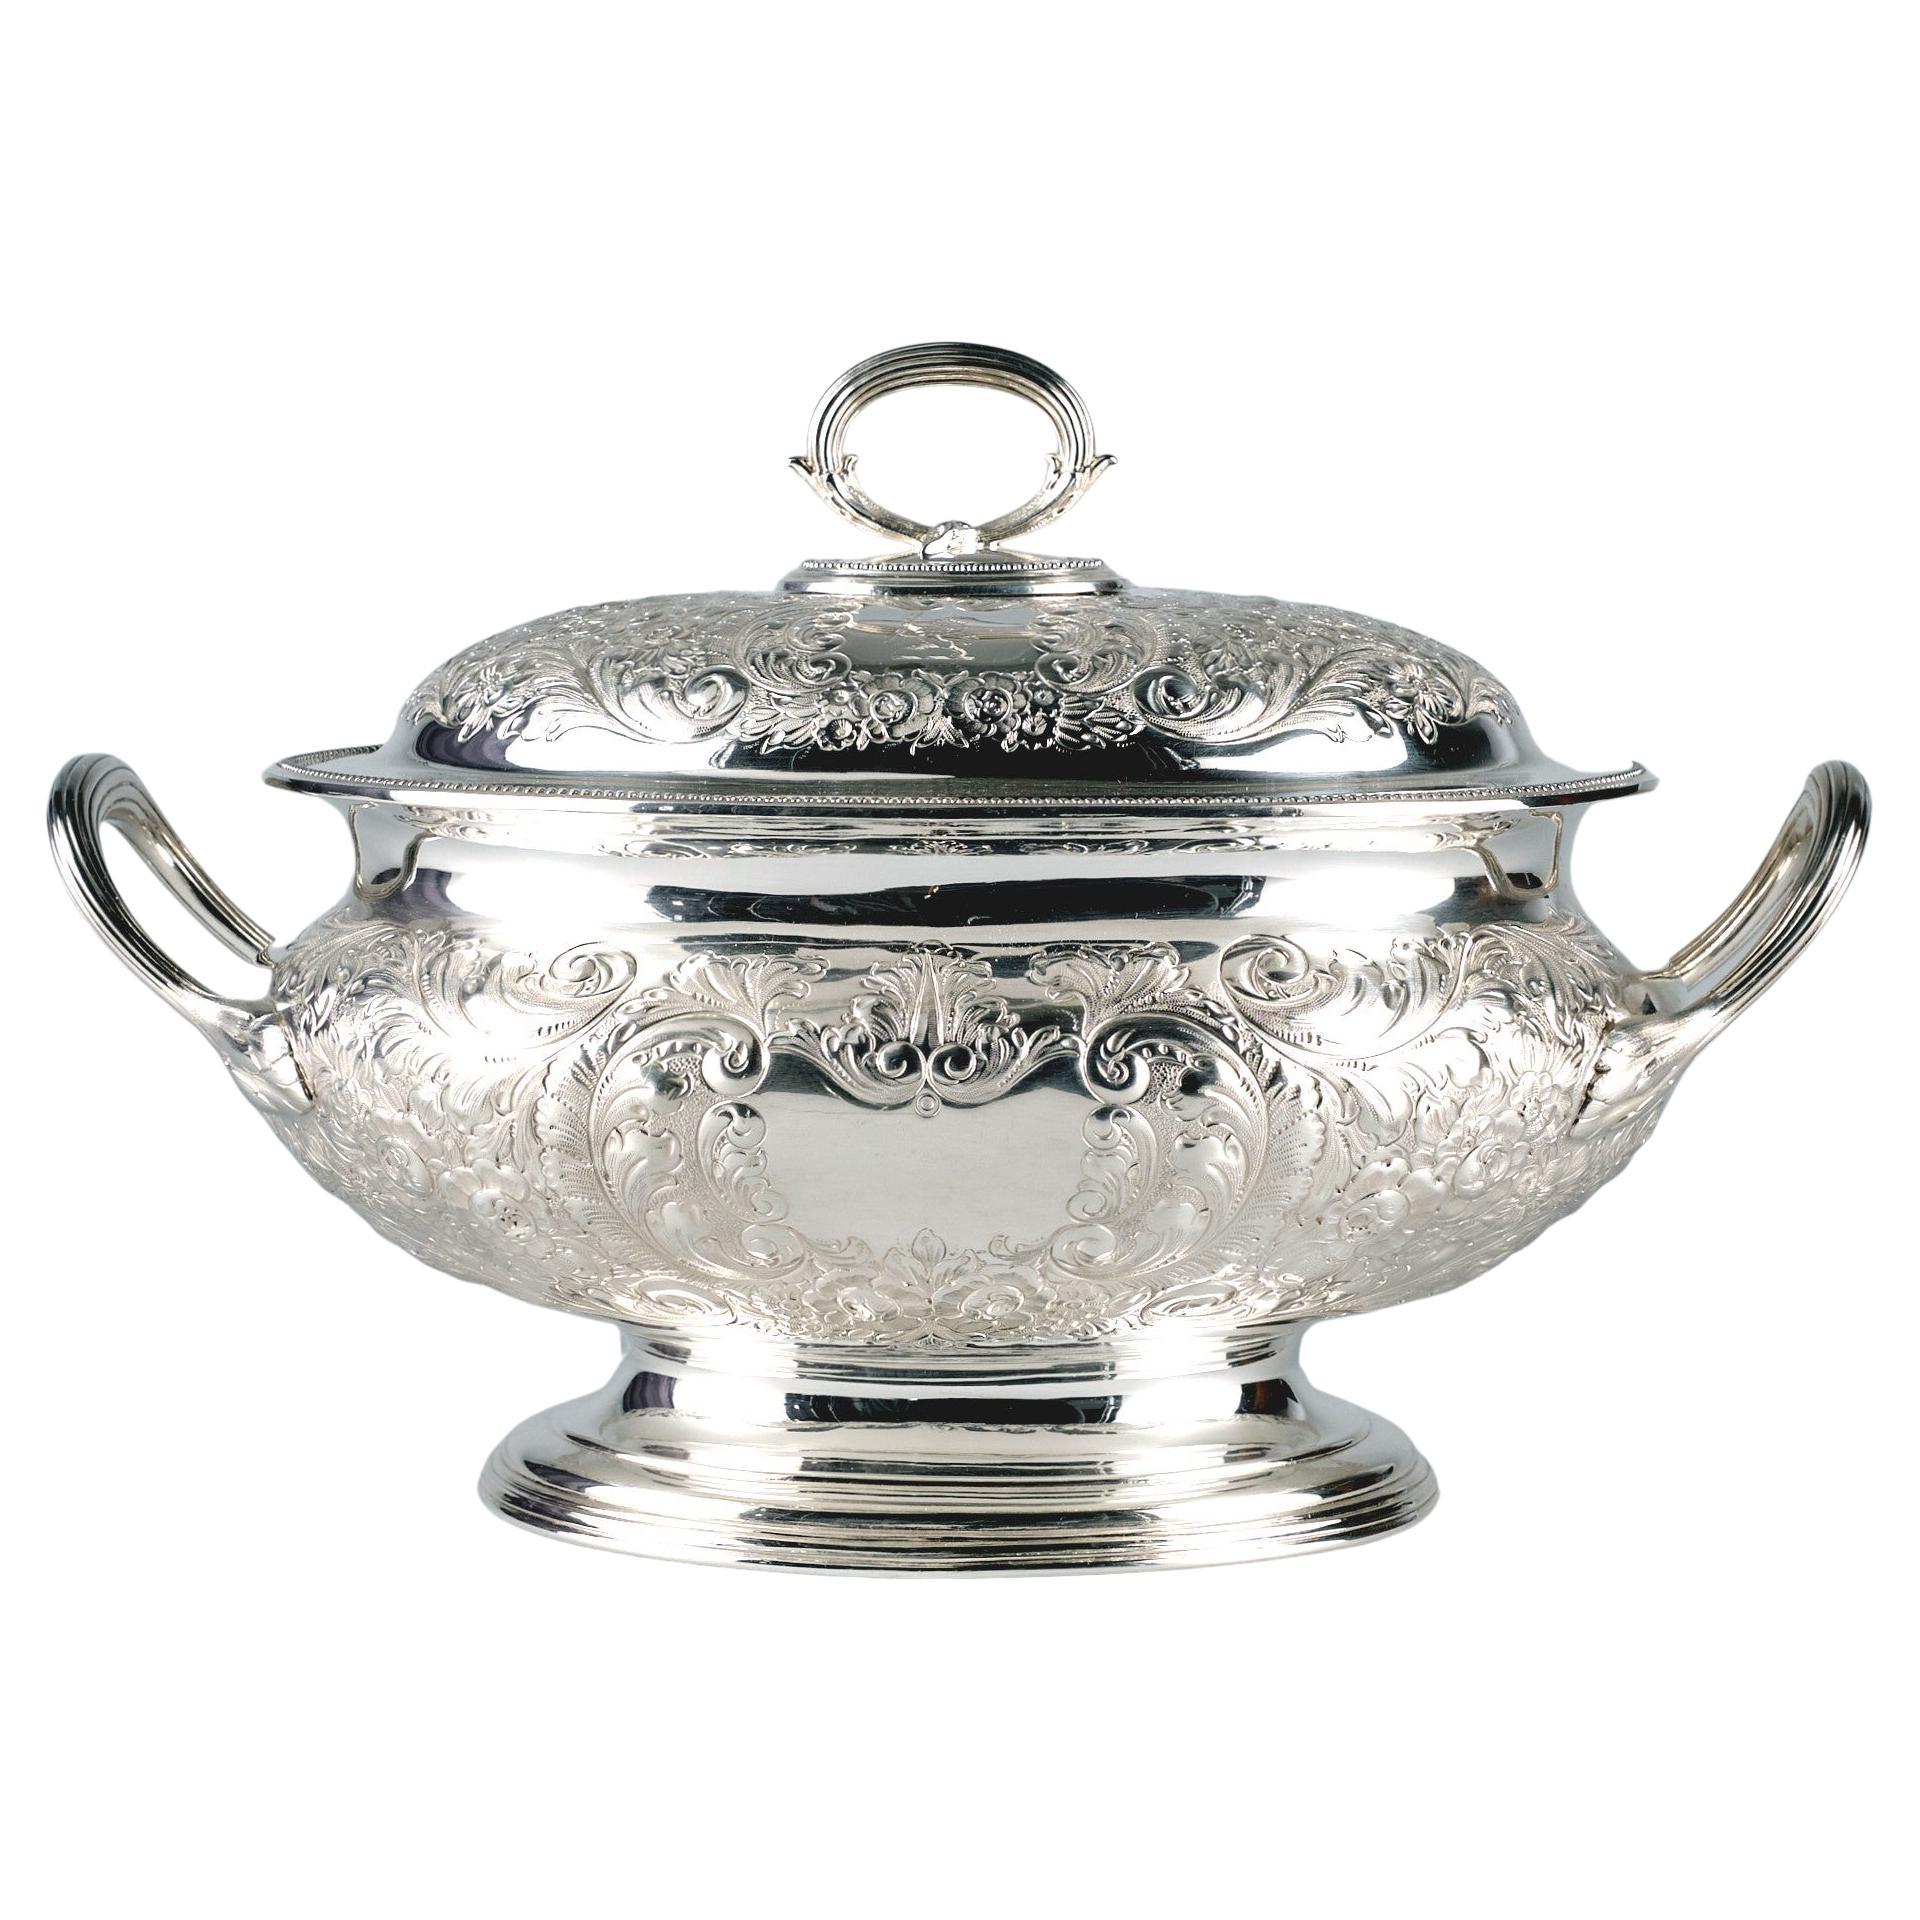 A Very Fine 19th Century Silver Plated Lidded Soup Tureen by Elkington & Company For Sale